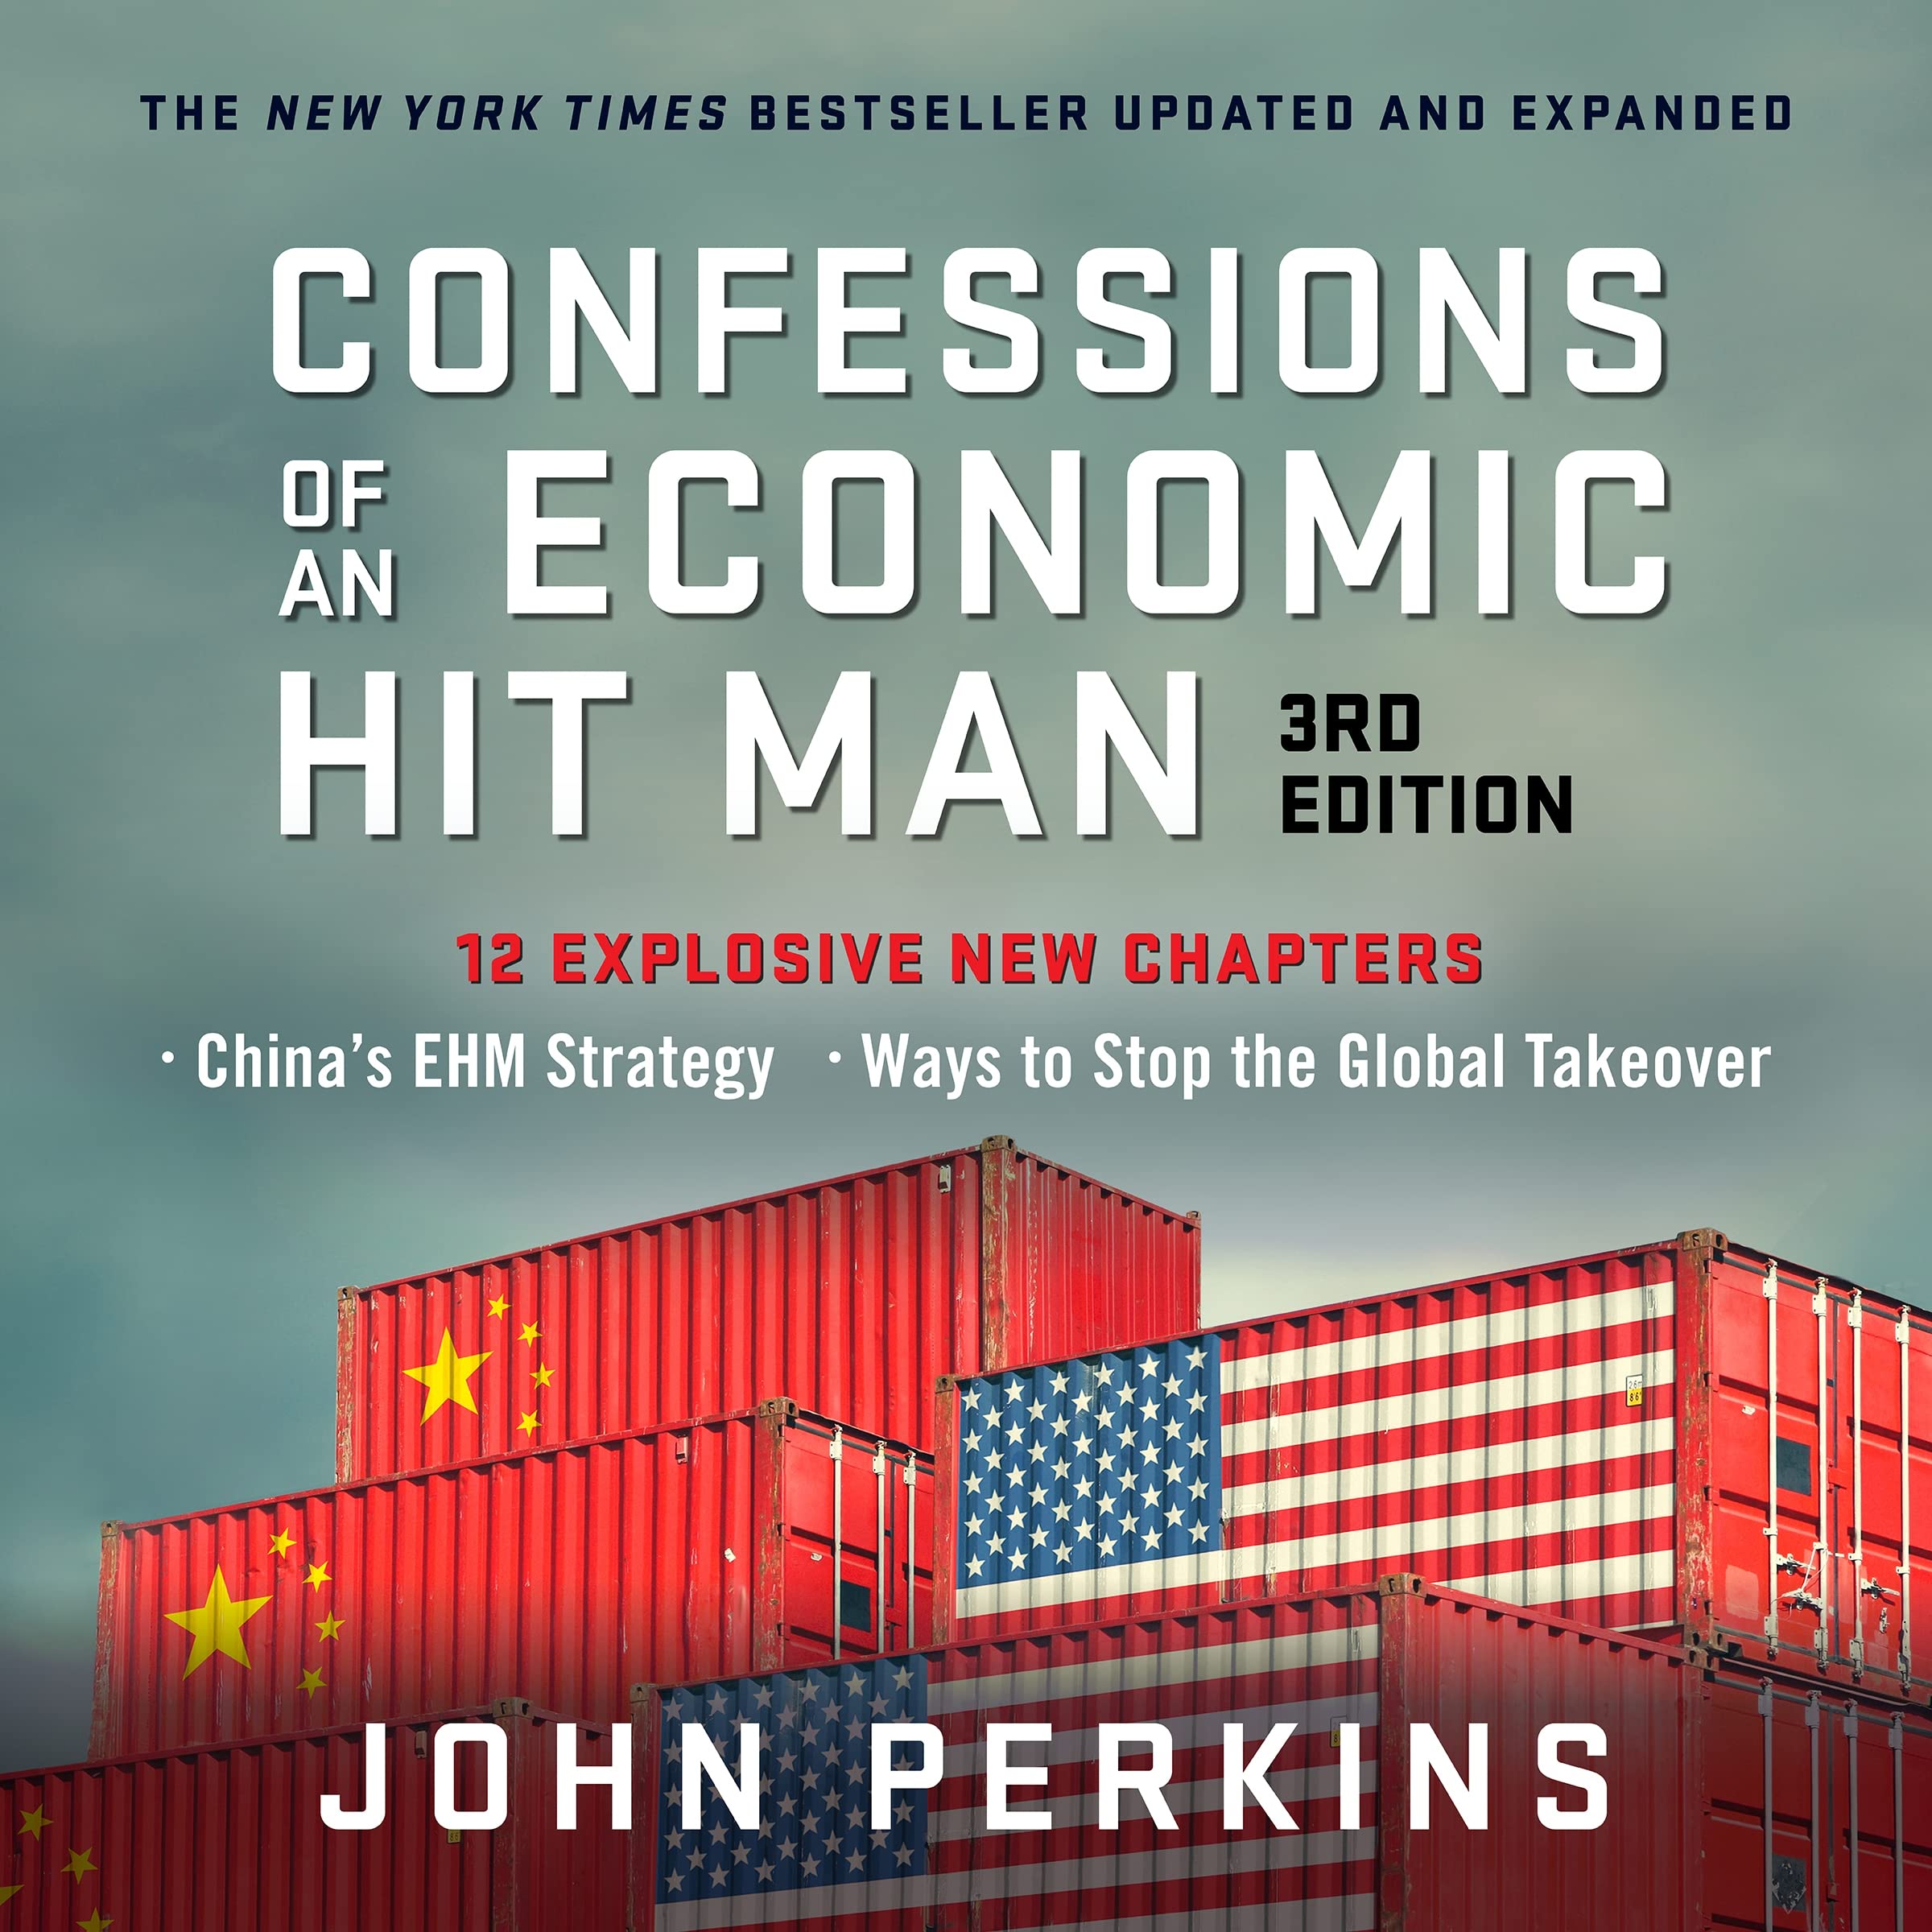 Confessions of an Economic Hit Man, 3rd Edition: UPDATED AND EXPANDED